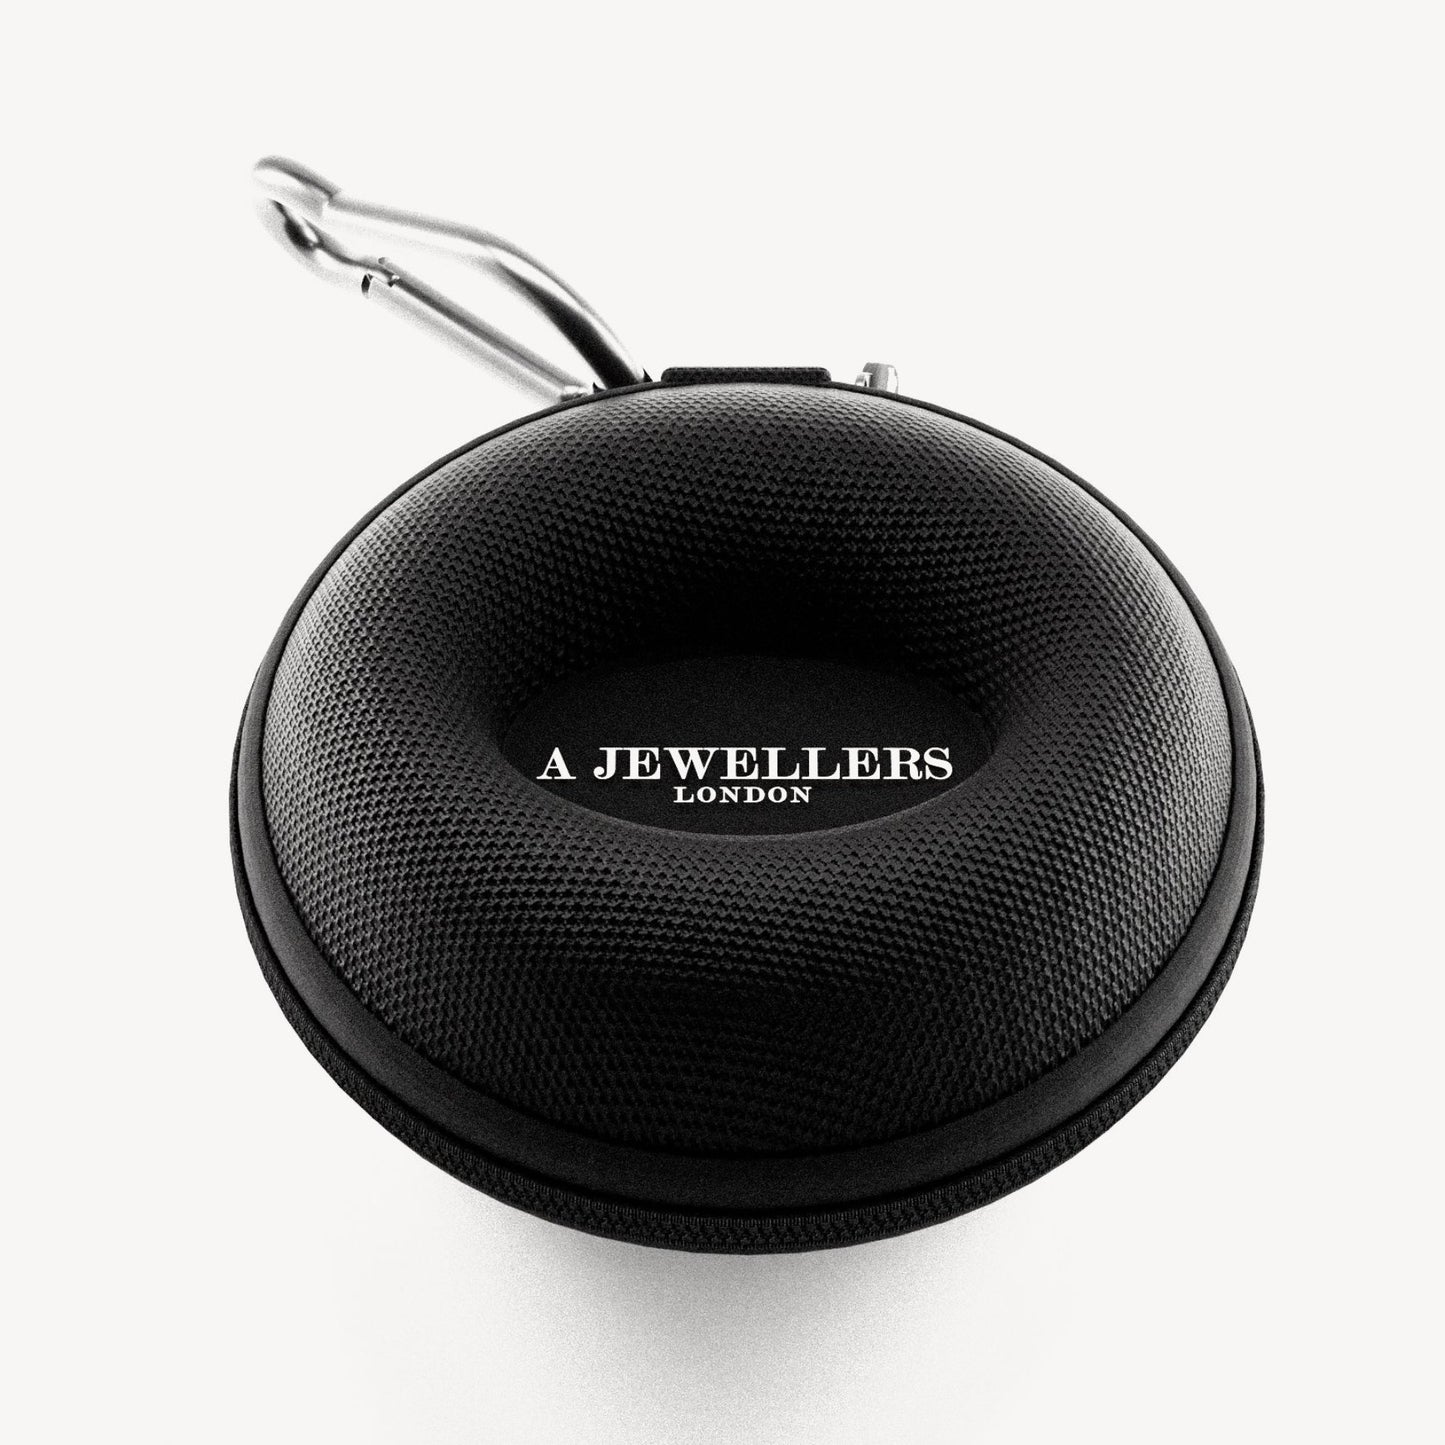 A Jewellers Single Watch Travel Case - A Jewellers